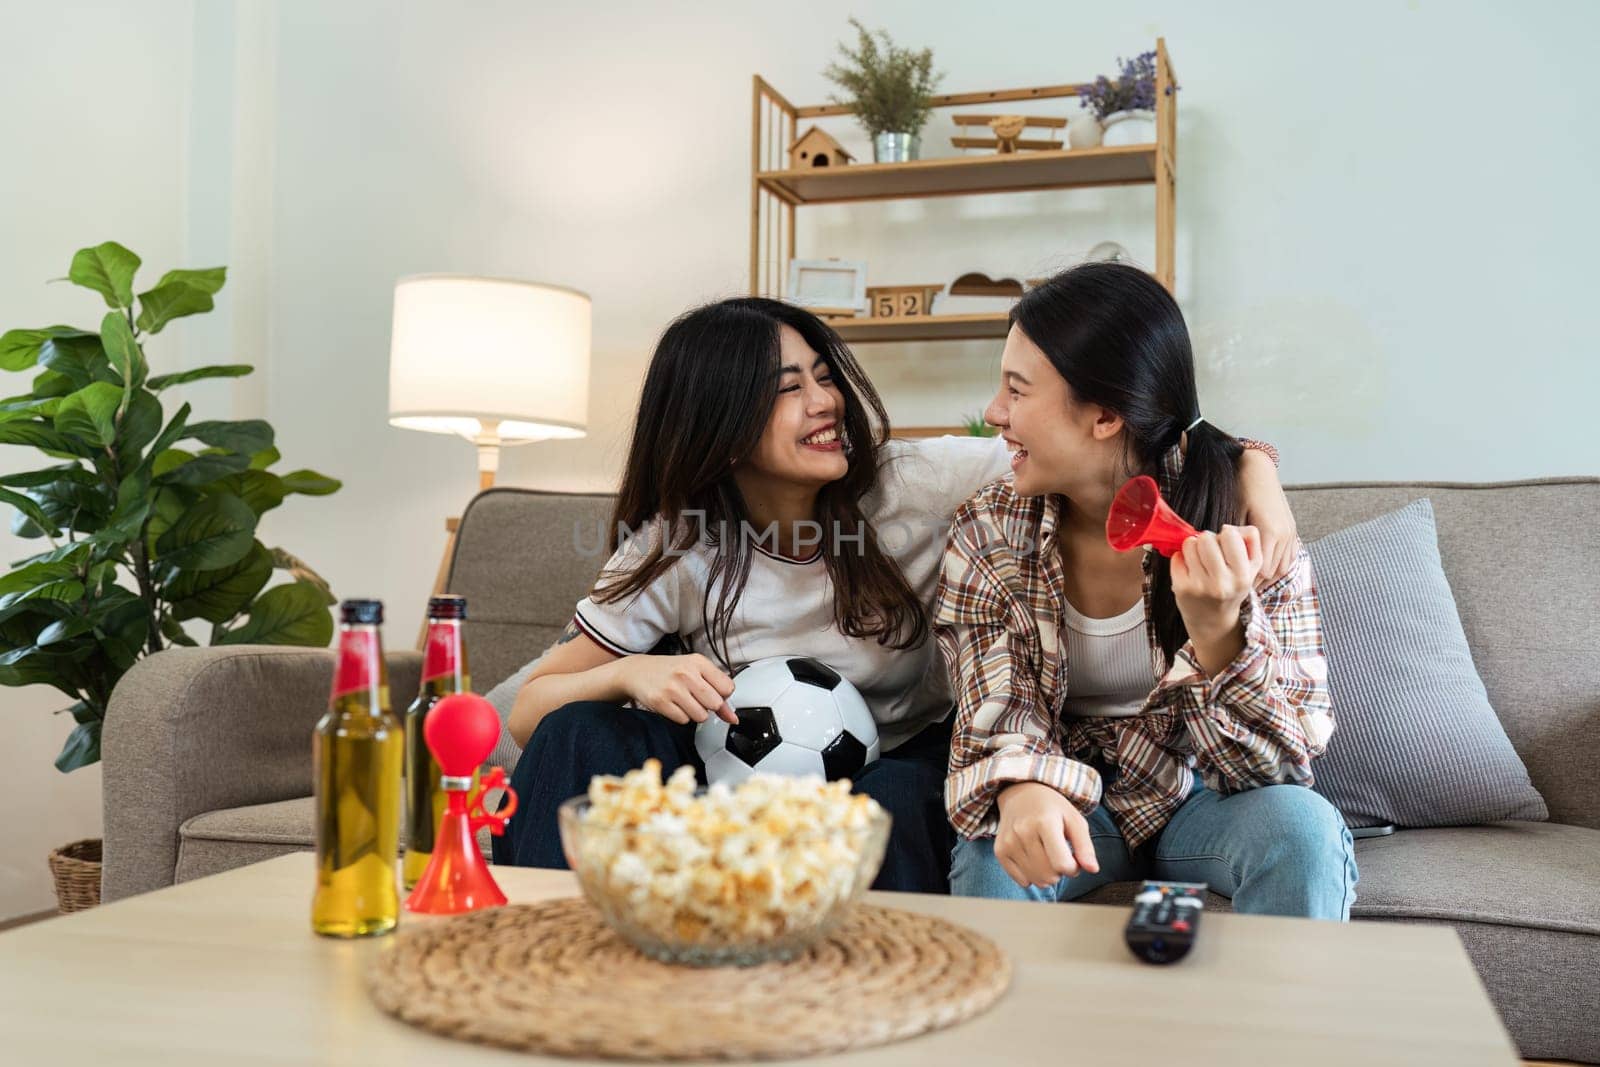 LGBT Soccer or Sport fans emotionally watching game in the living room.